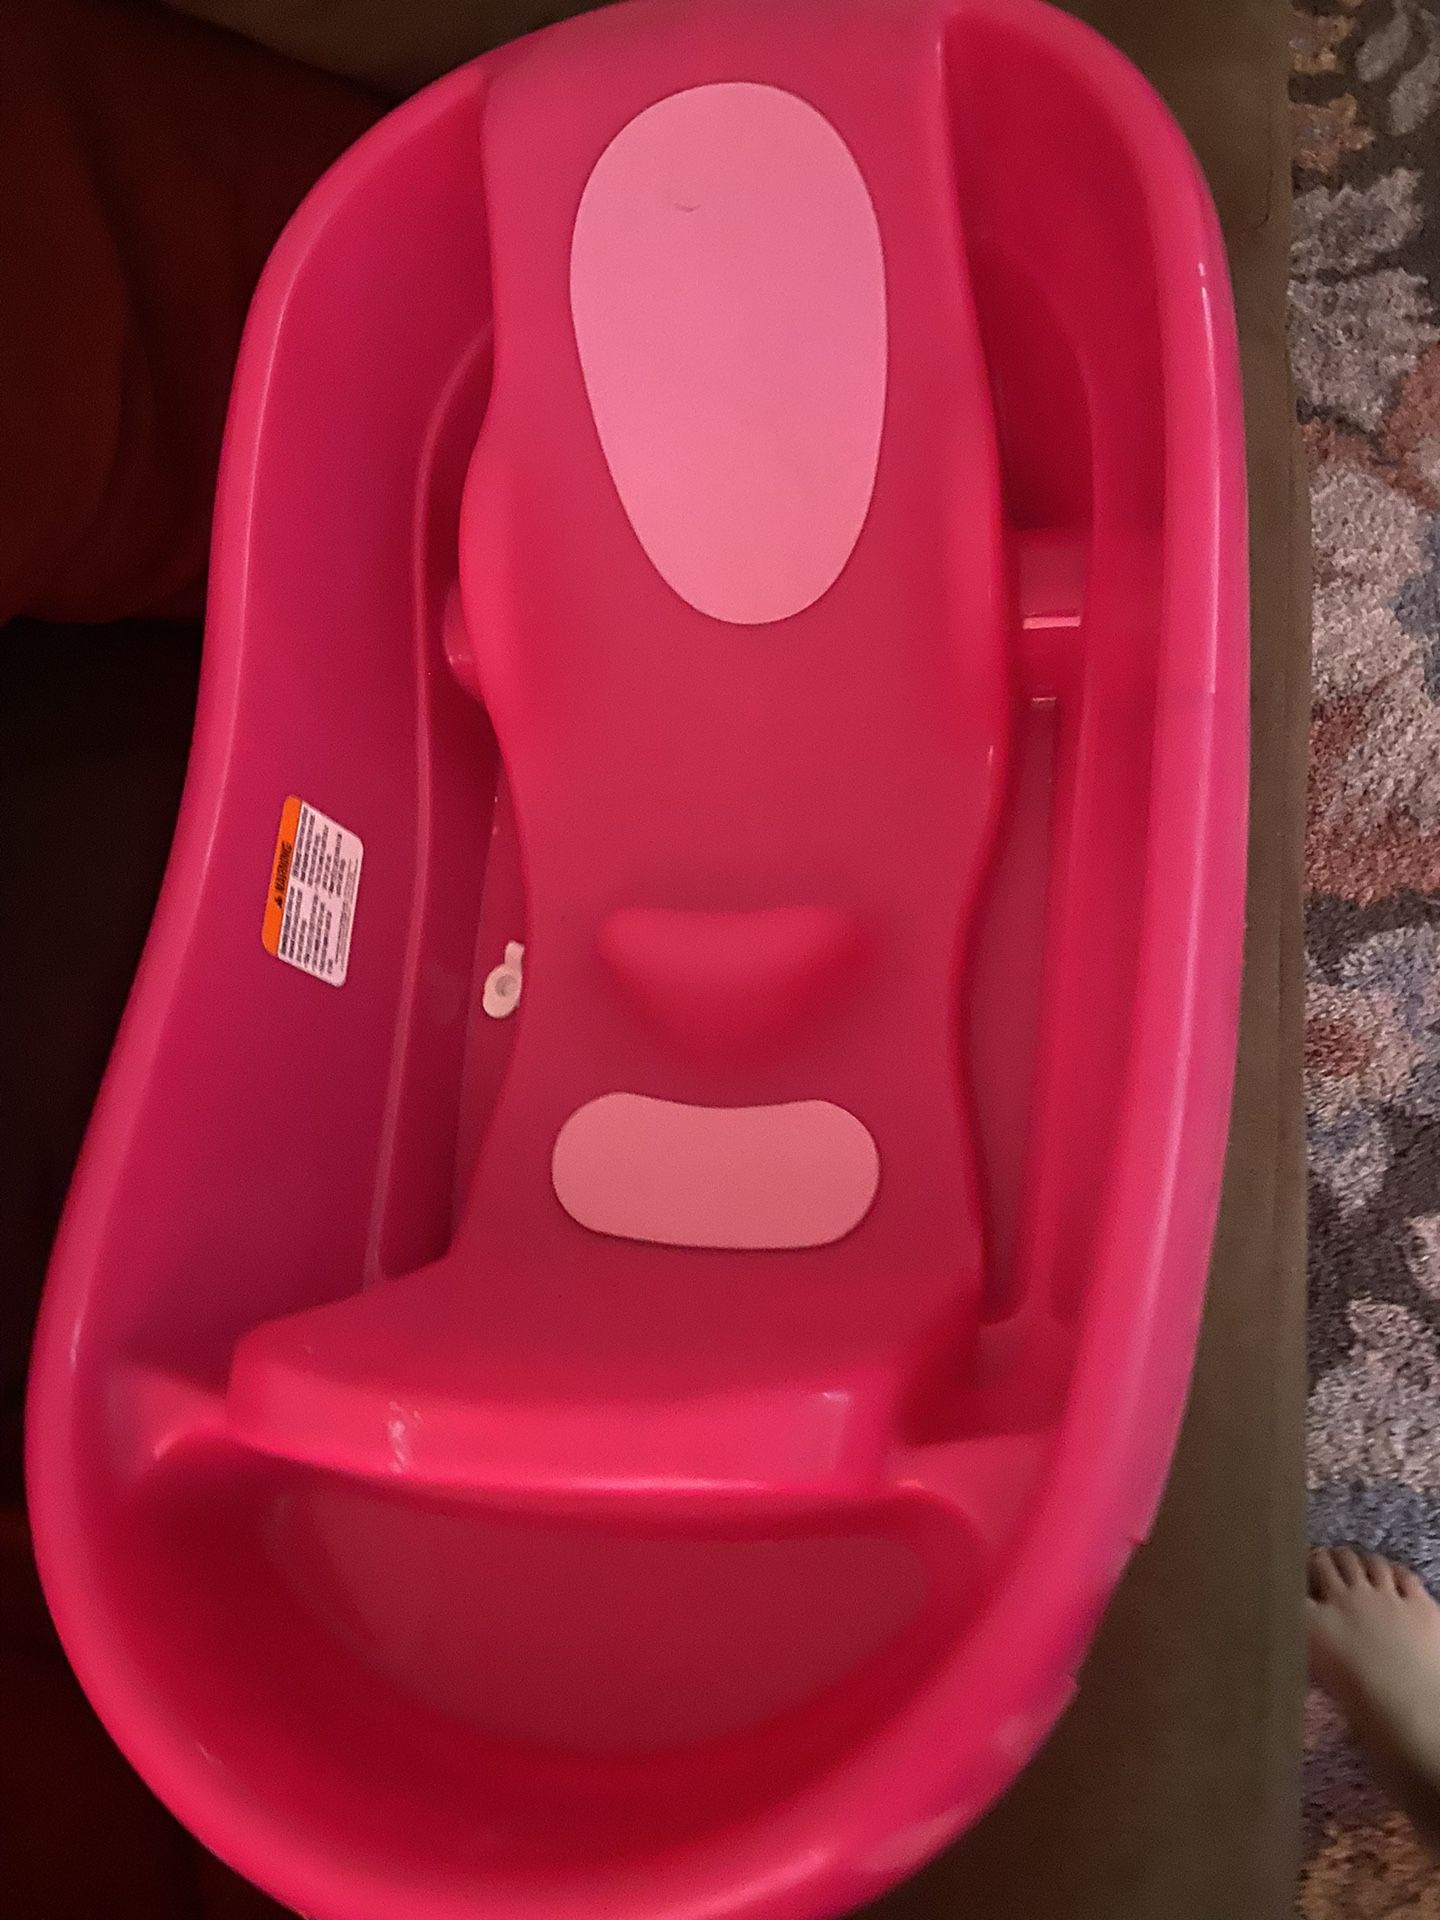 Baby bath Pink ***Great Condition***